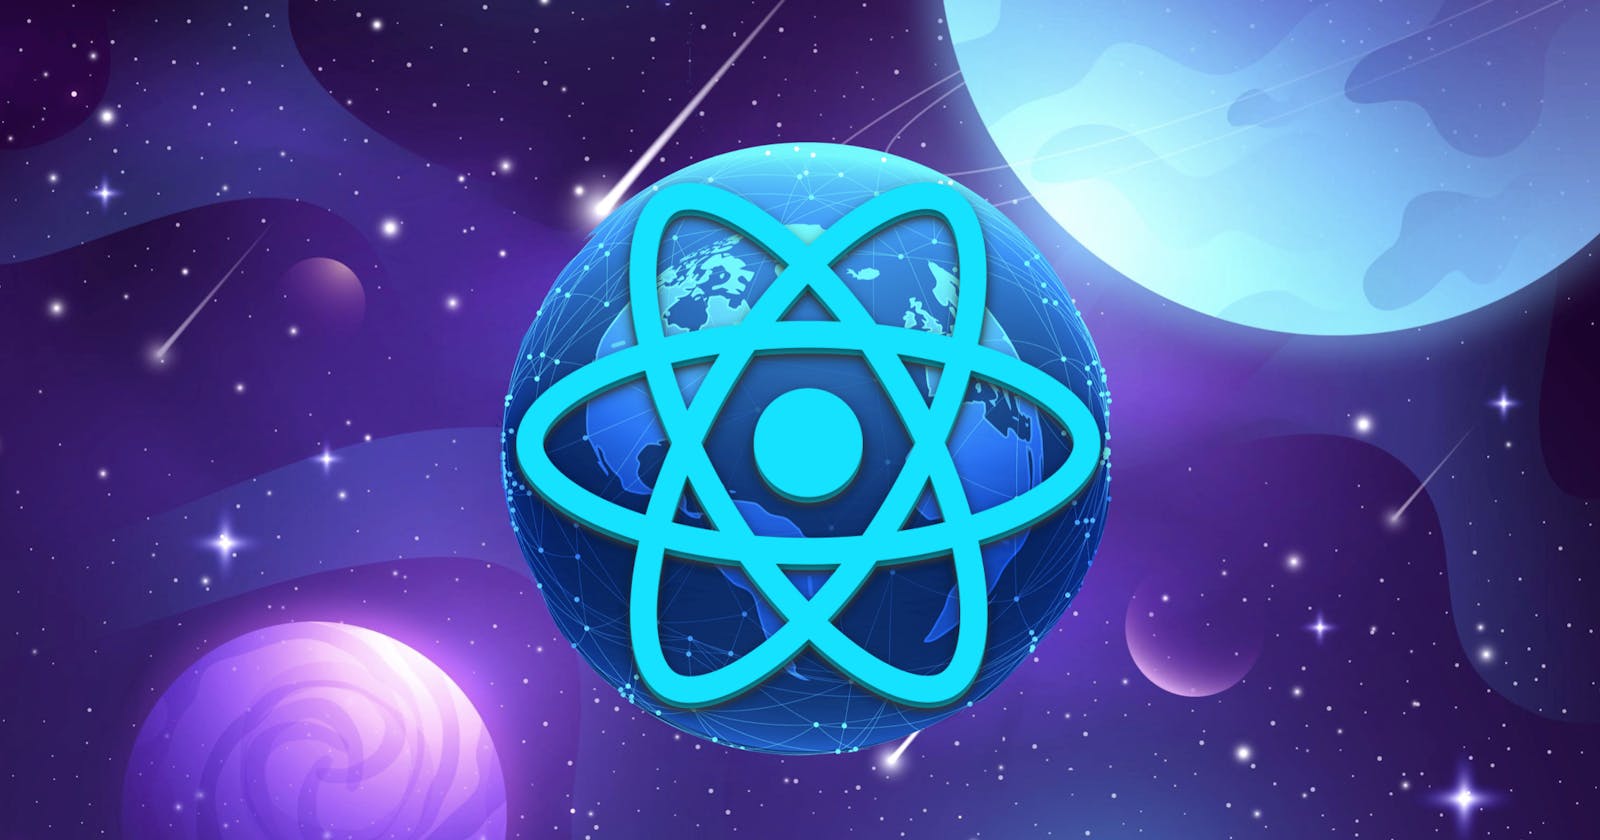 Mastering Advanced React Features: A Step-by-Step Guide to Hooks, Context, and Portals.